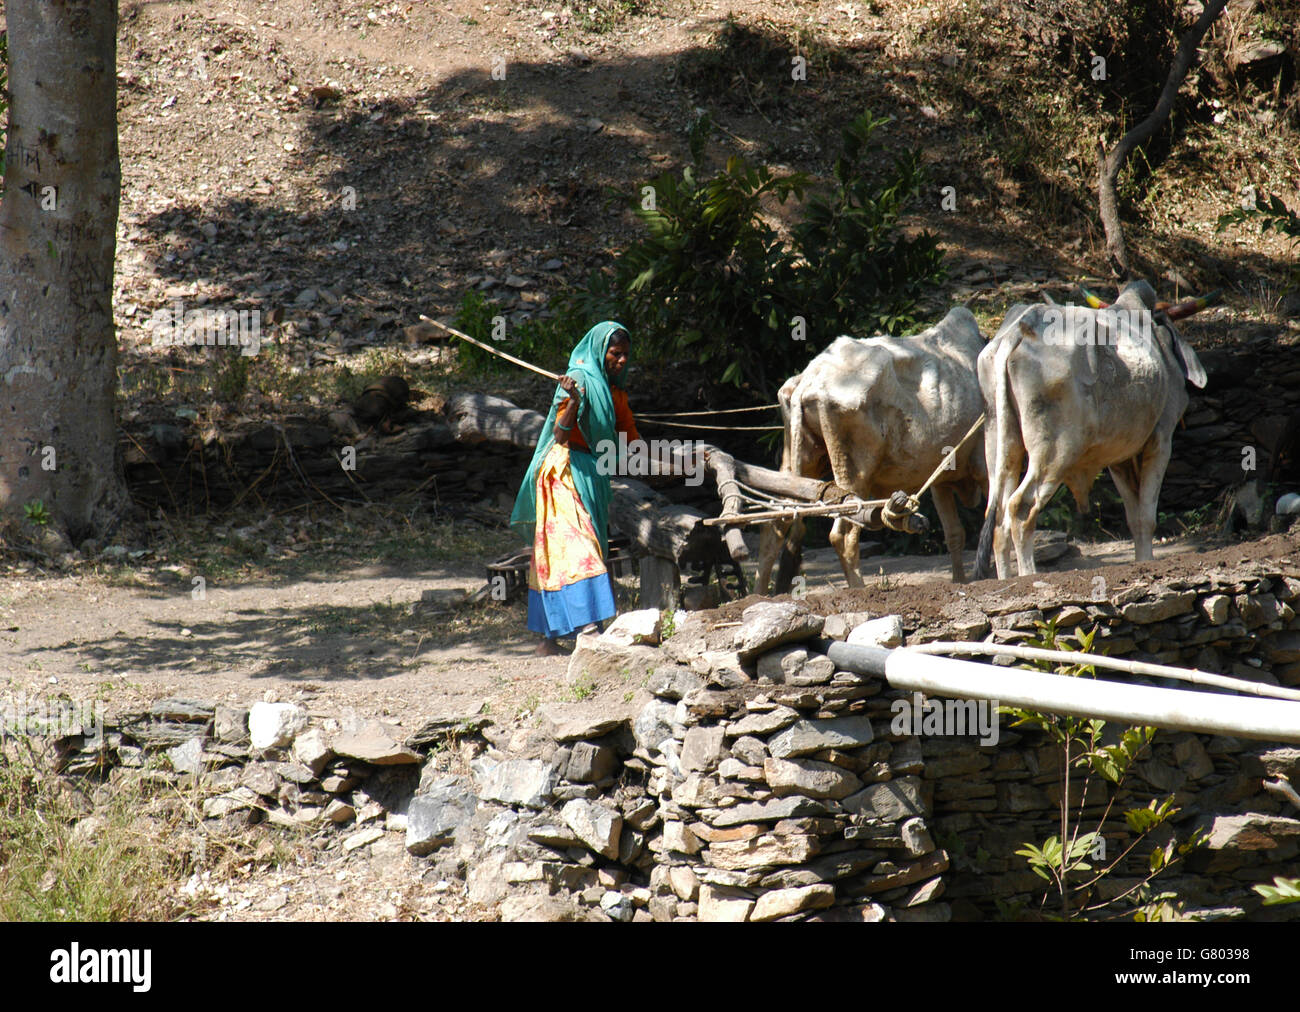 Indian woman using two bull cows for heavy farming work in rural area of Rajasthan. Stock Photo